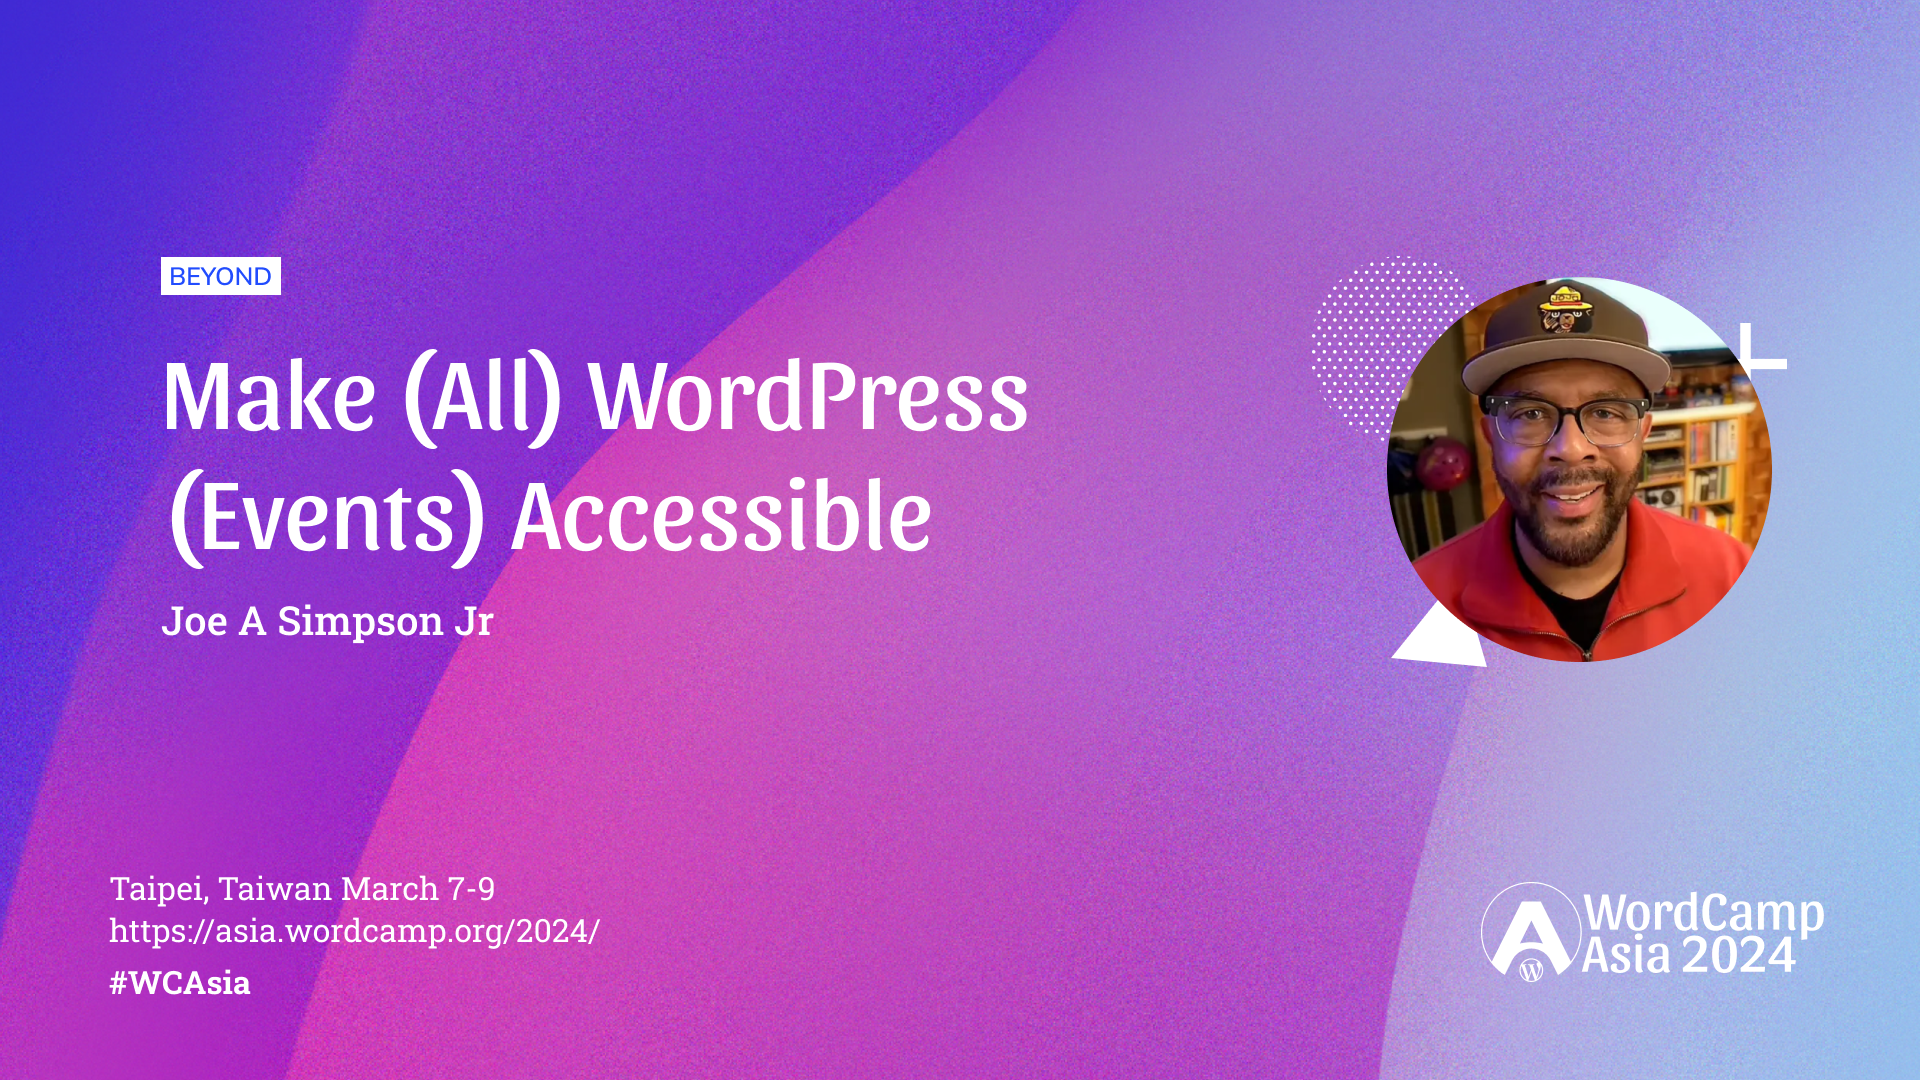 Make (All) WordPress (Events) Accessible